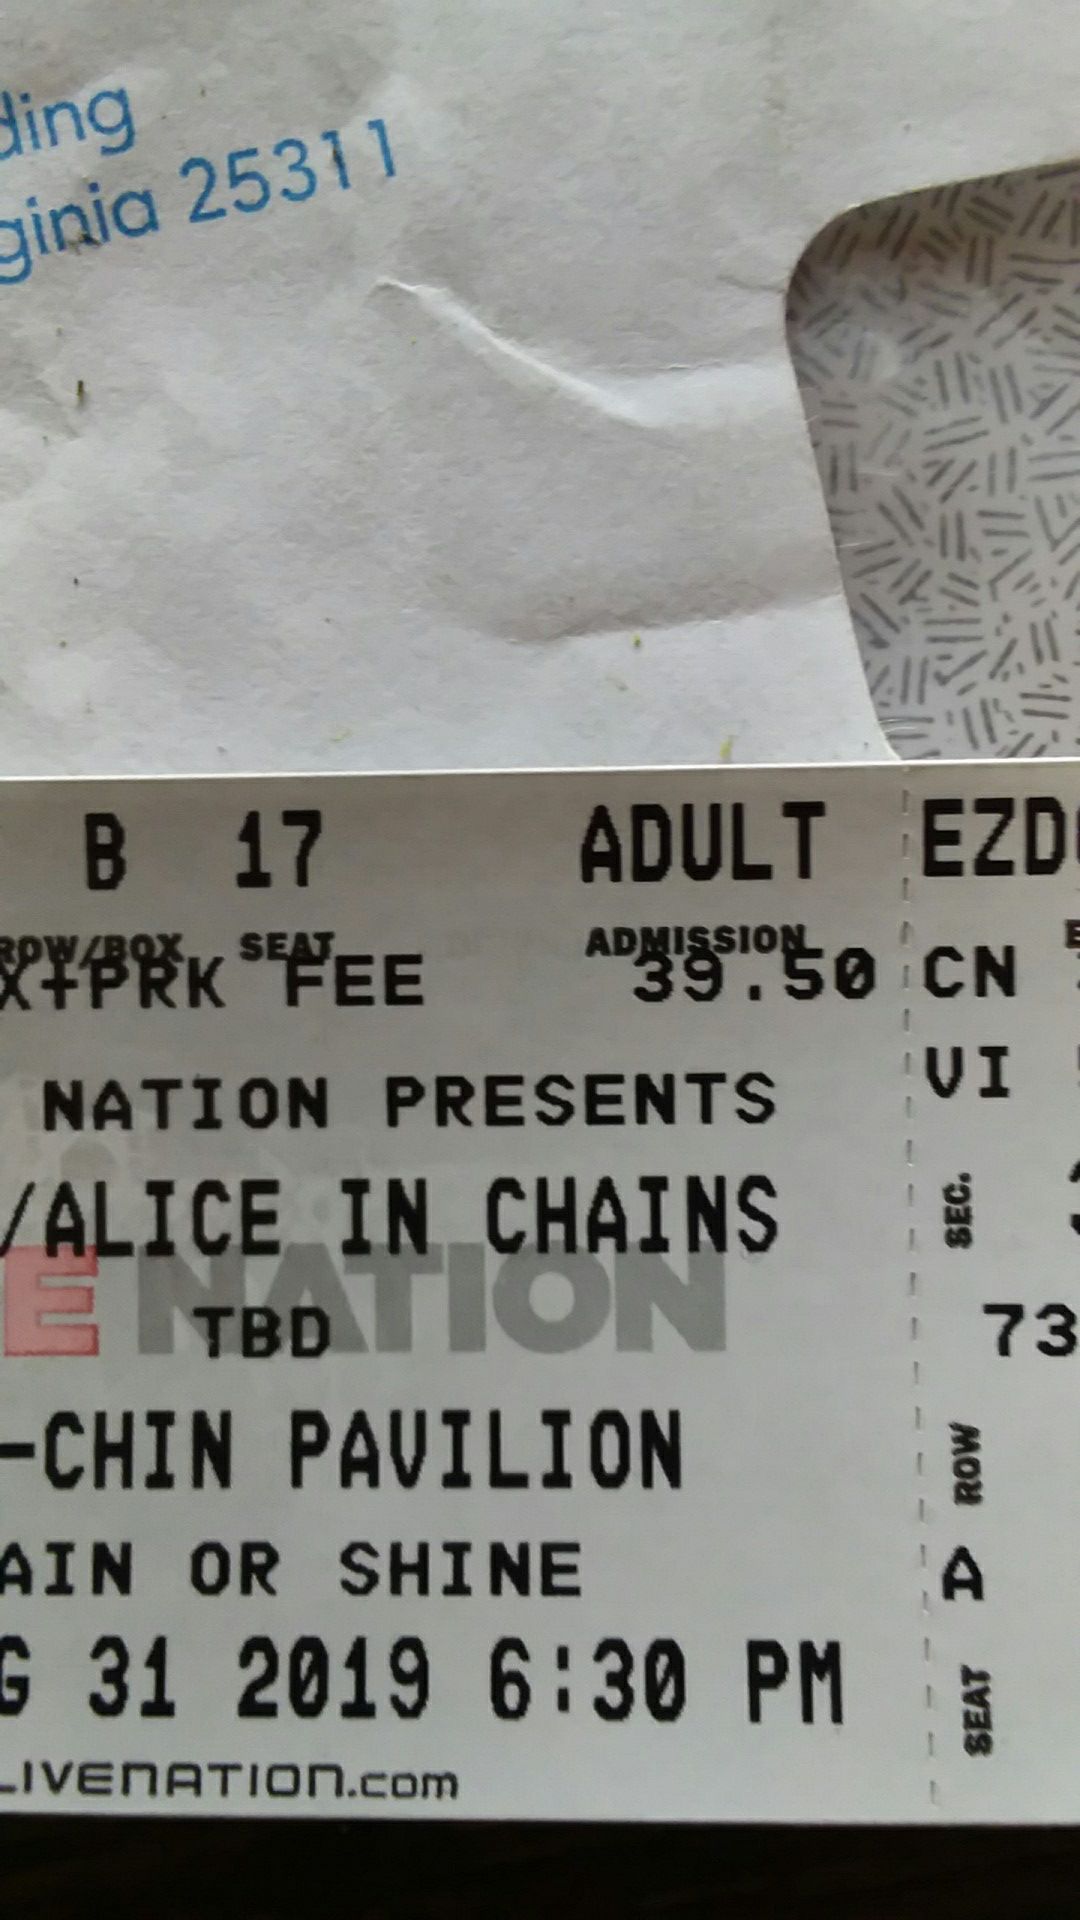 Alice in chains and korn